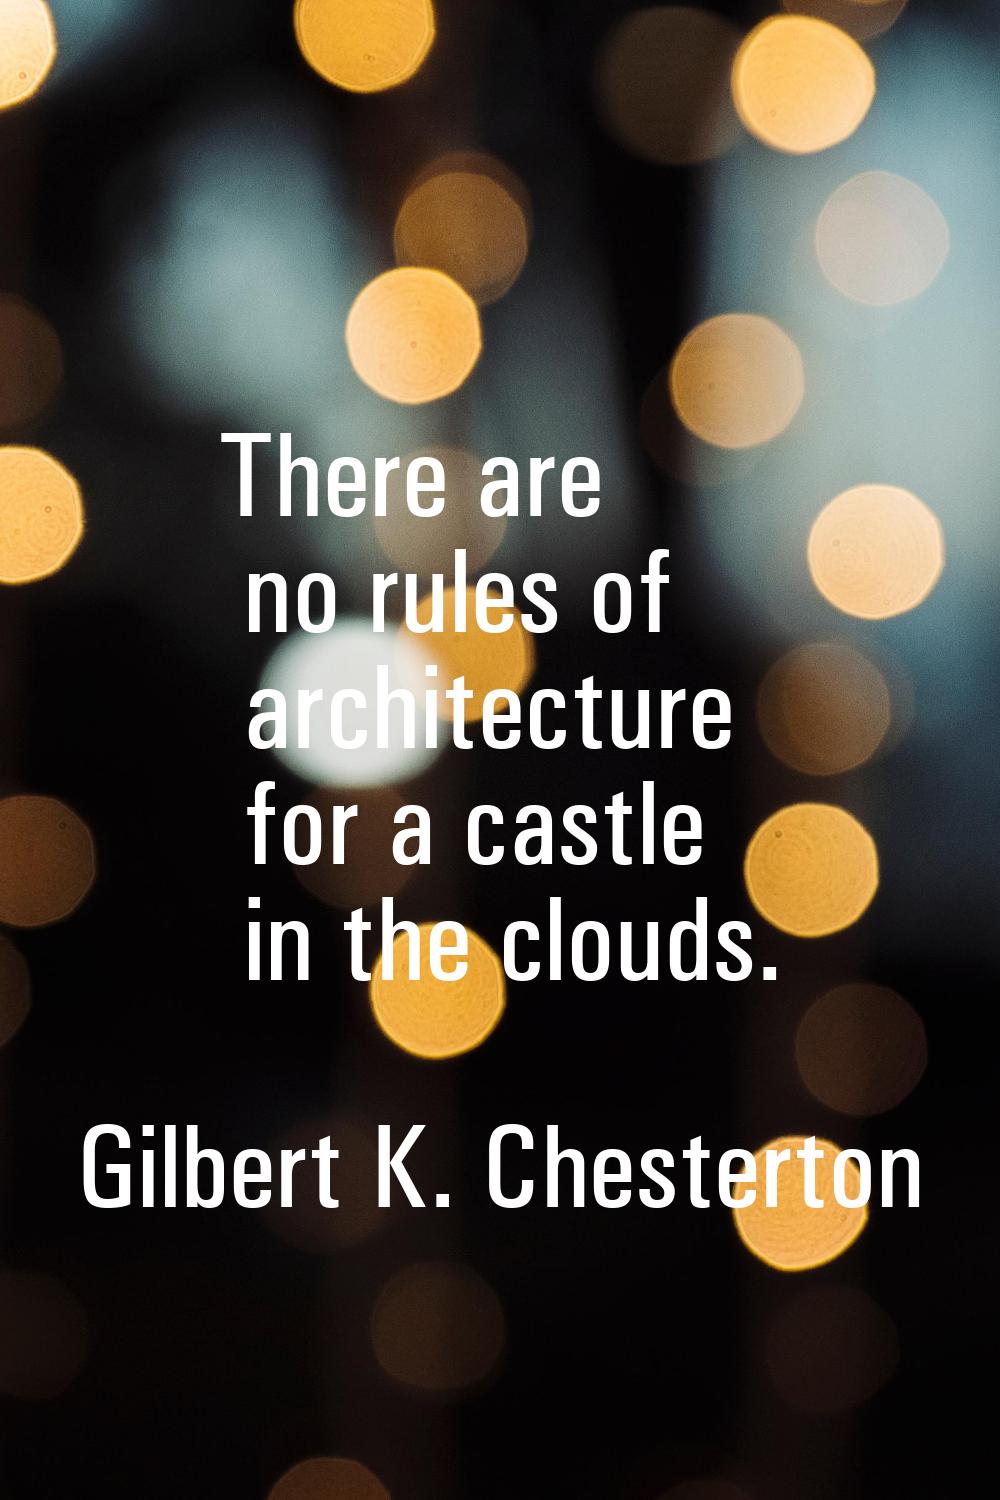 There are no rules of architecture for a castle in the clouds.